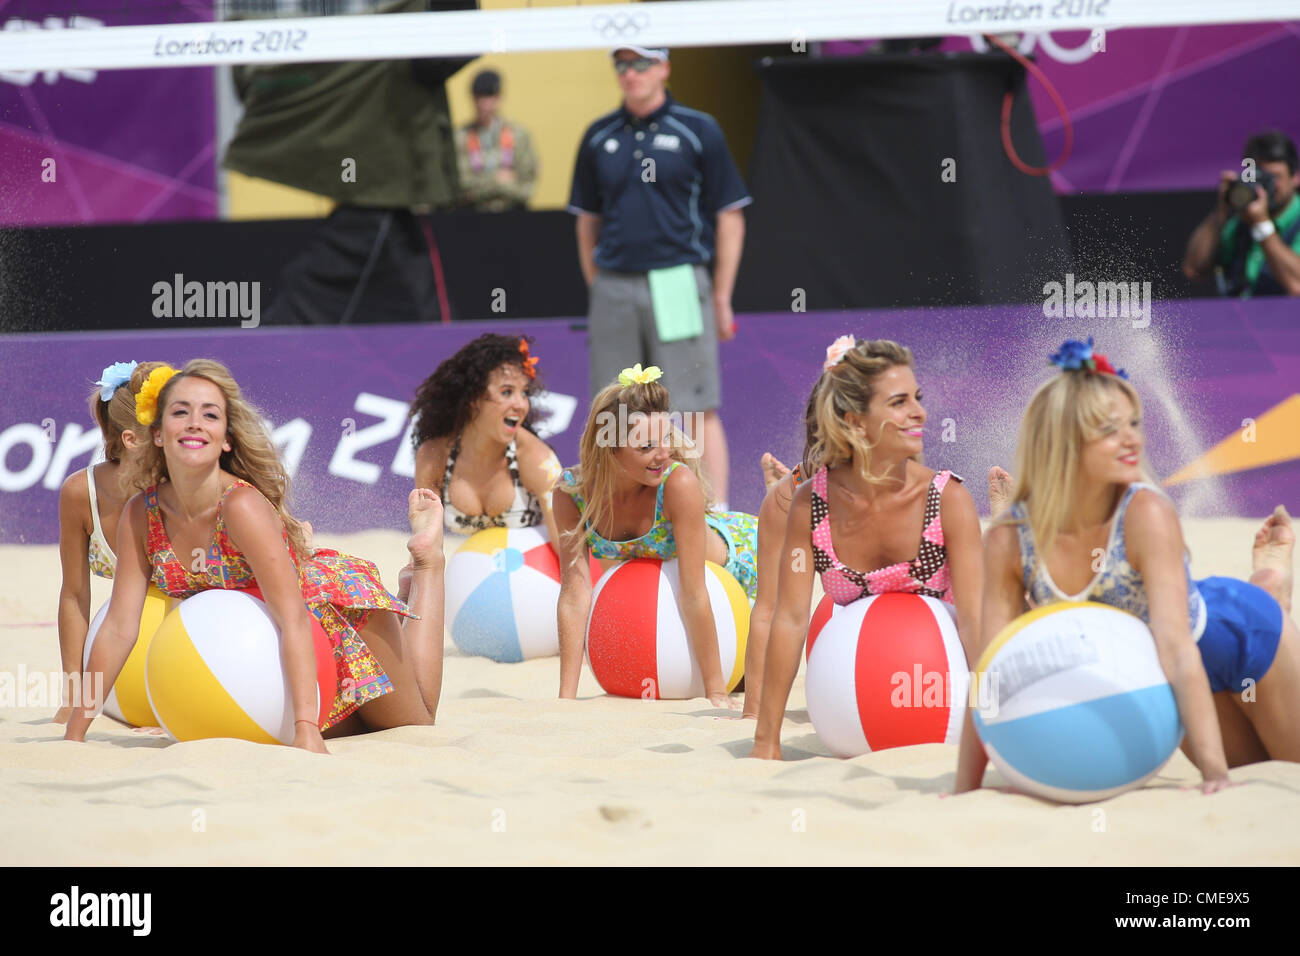 CHEER LEADERS WOMENS BEACH VOLLEYBALL HORSE GUARDS PARADE LONDON ENGLAND 29 July 2012 Stock Photo